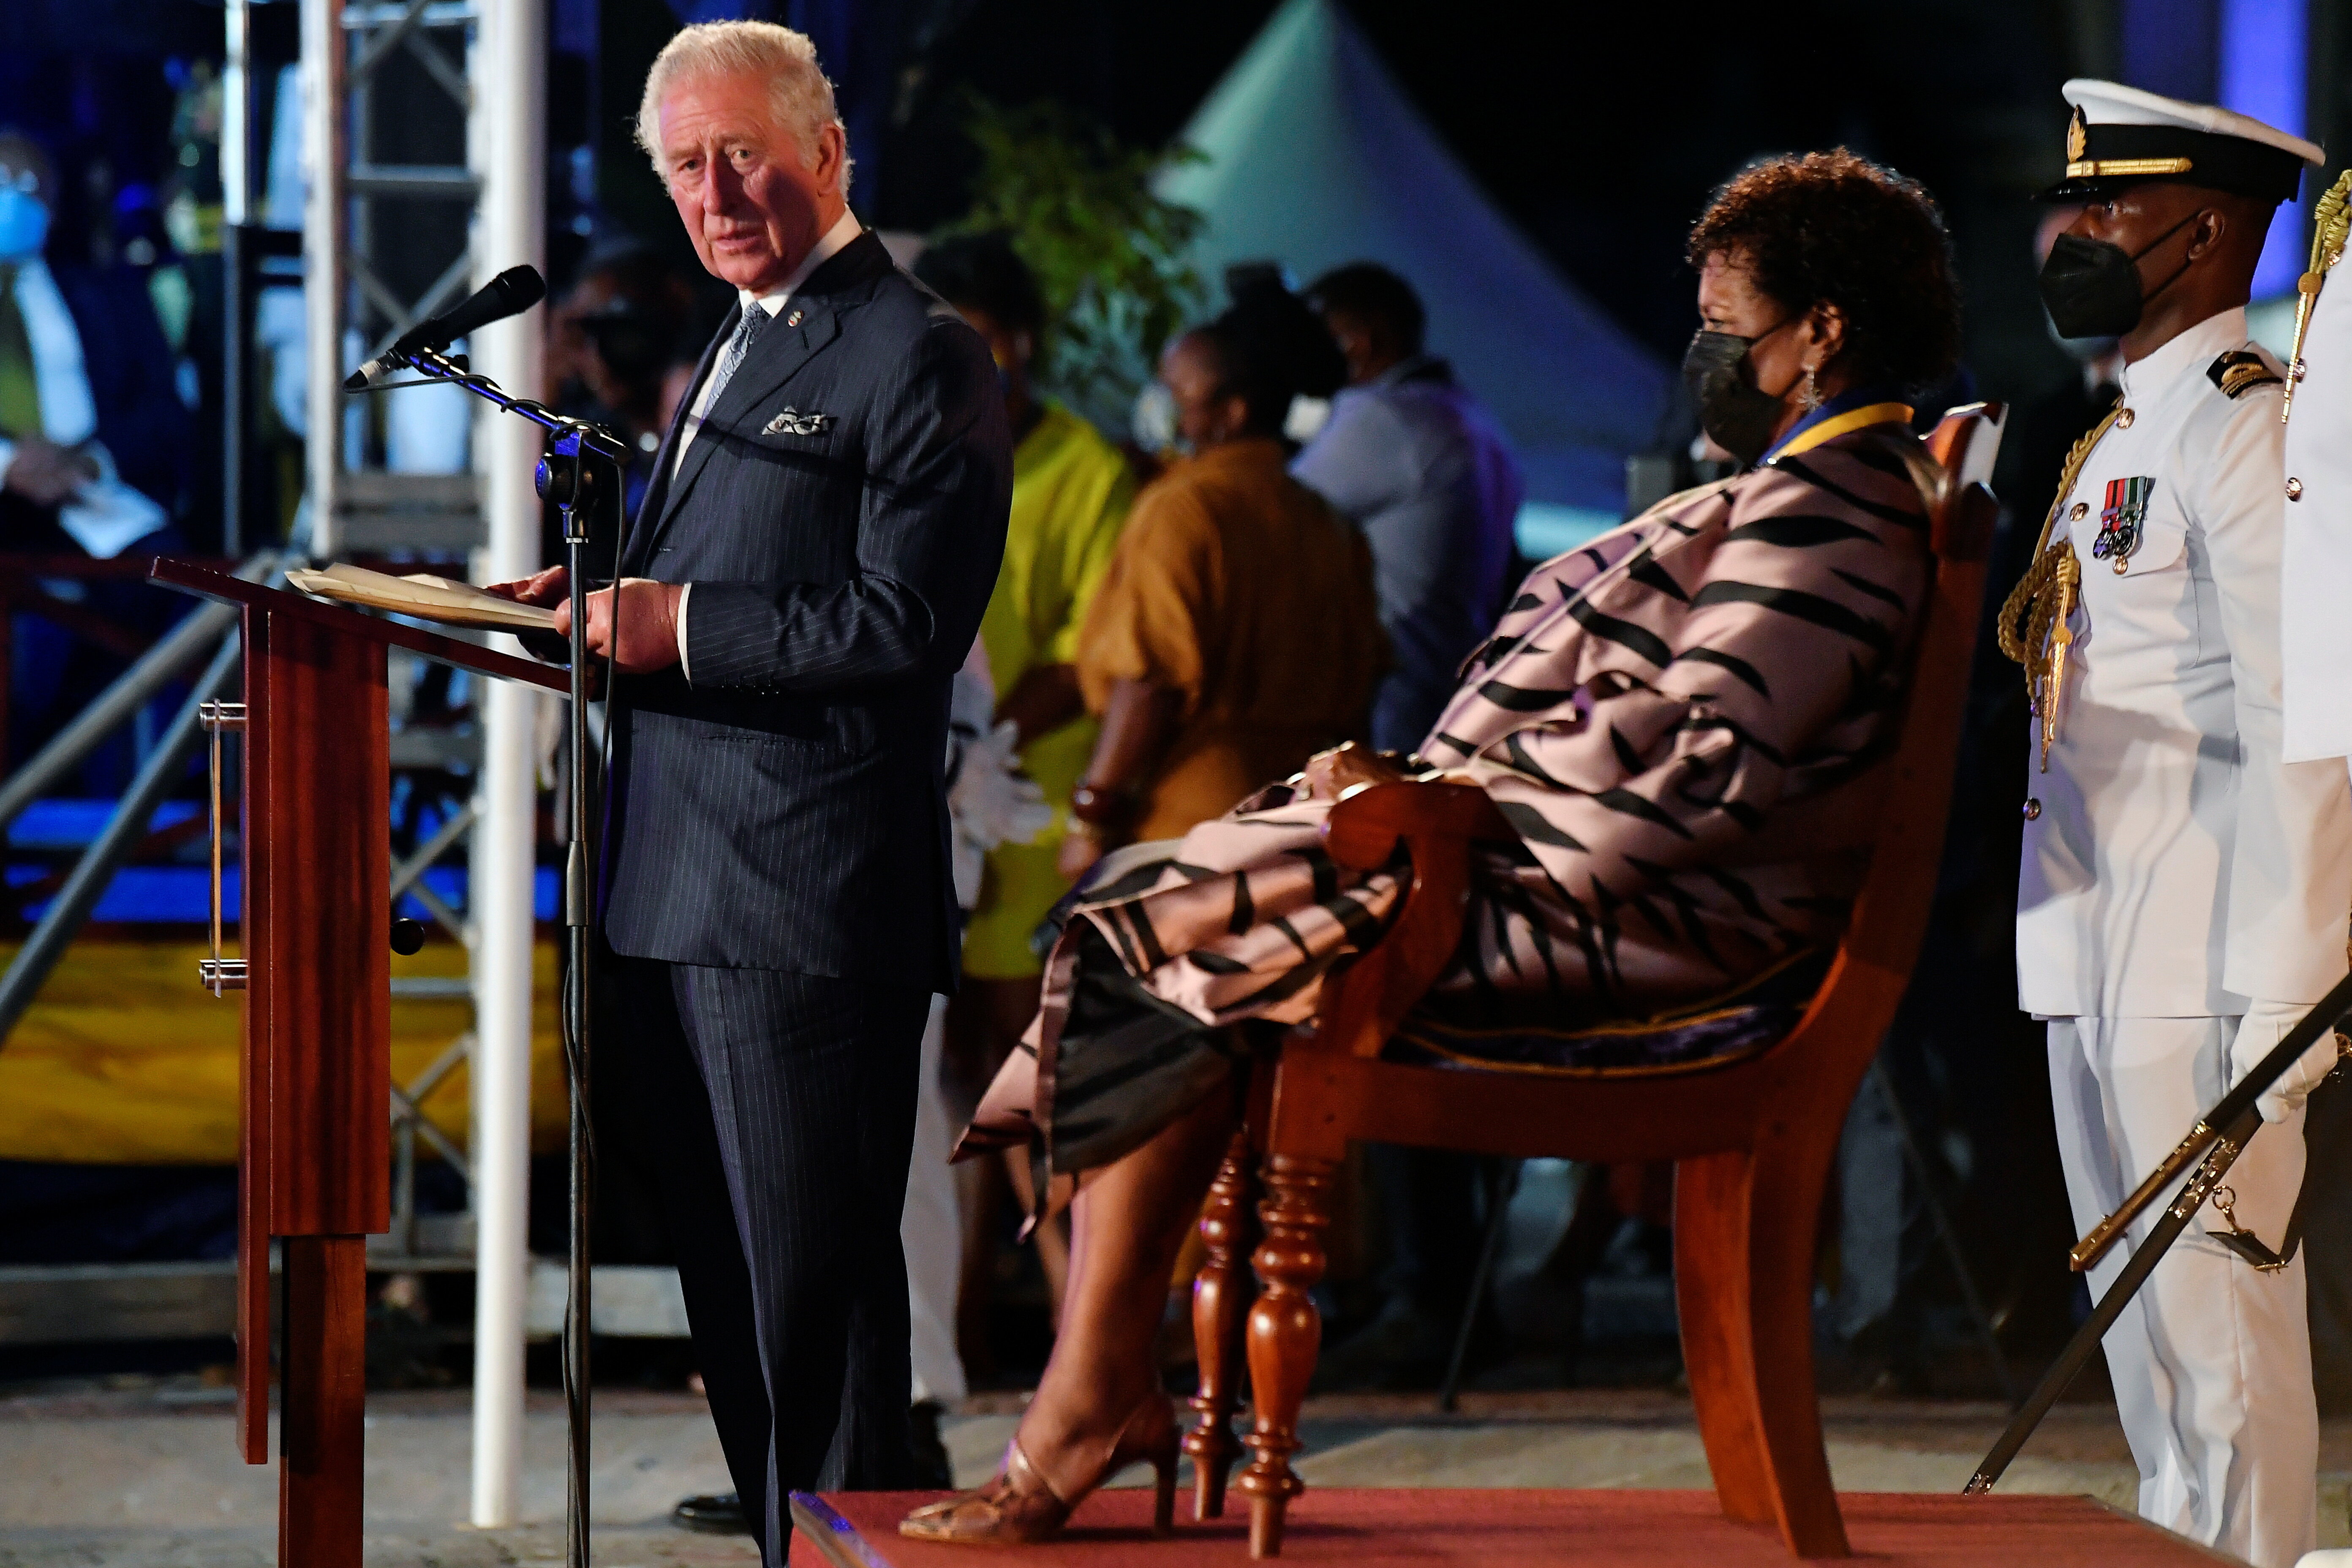 Prince Charles speaks as the president of Barbados, Dame Sandra Mason, seems on for the duration of her inauguration on Nov. 30, 2021, in Bridgetown, Barbados.